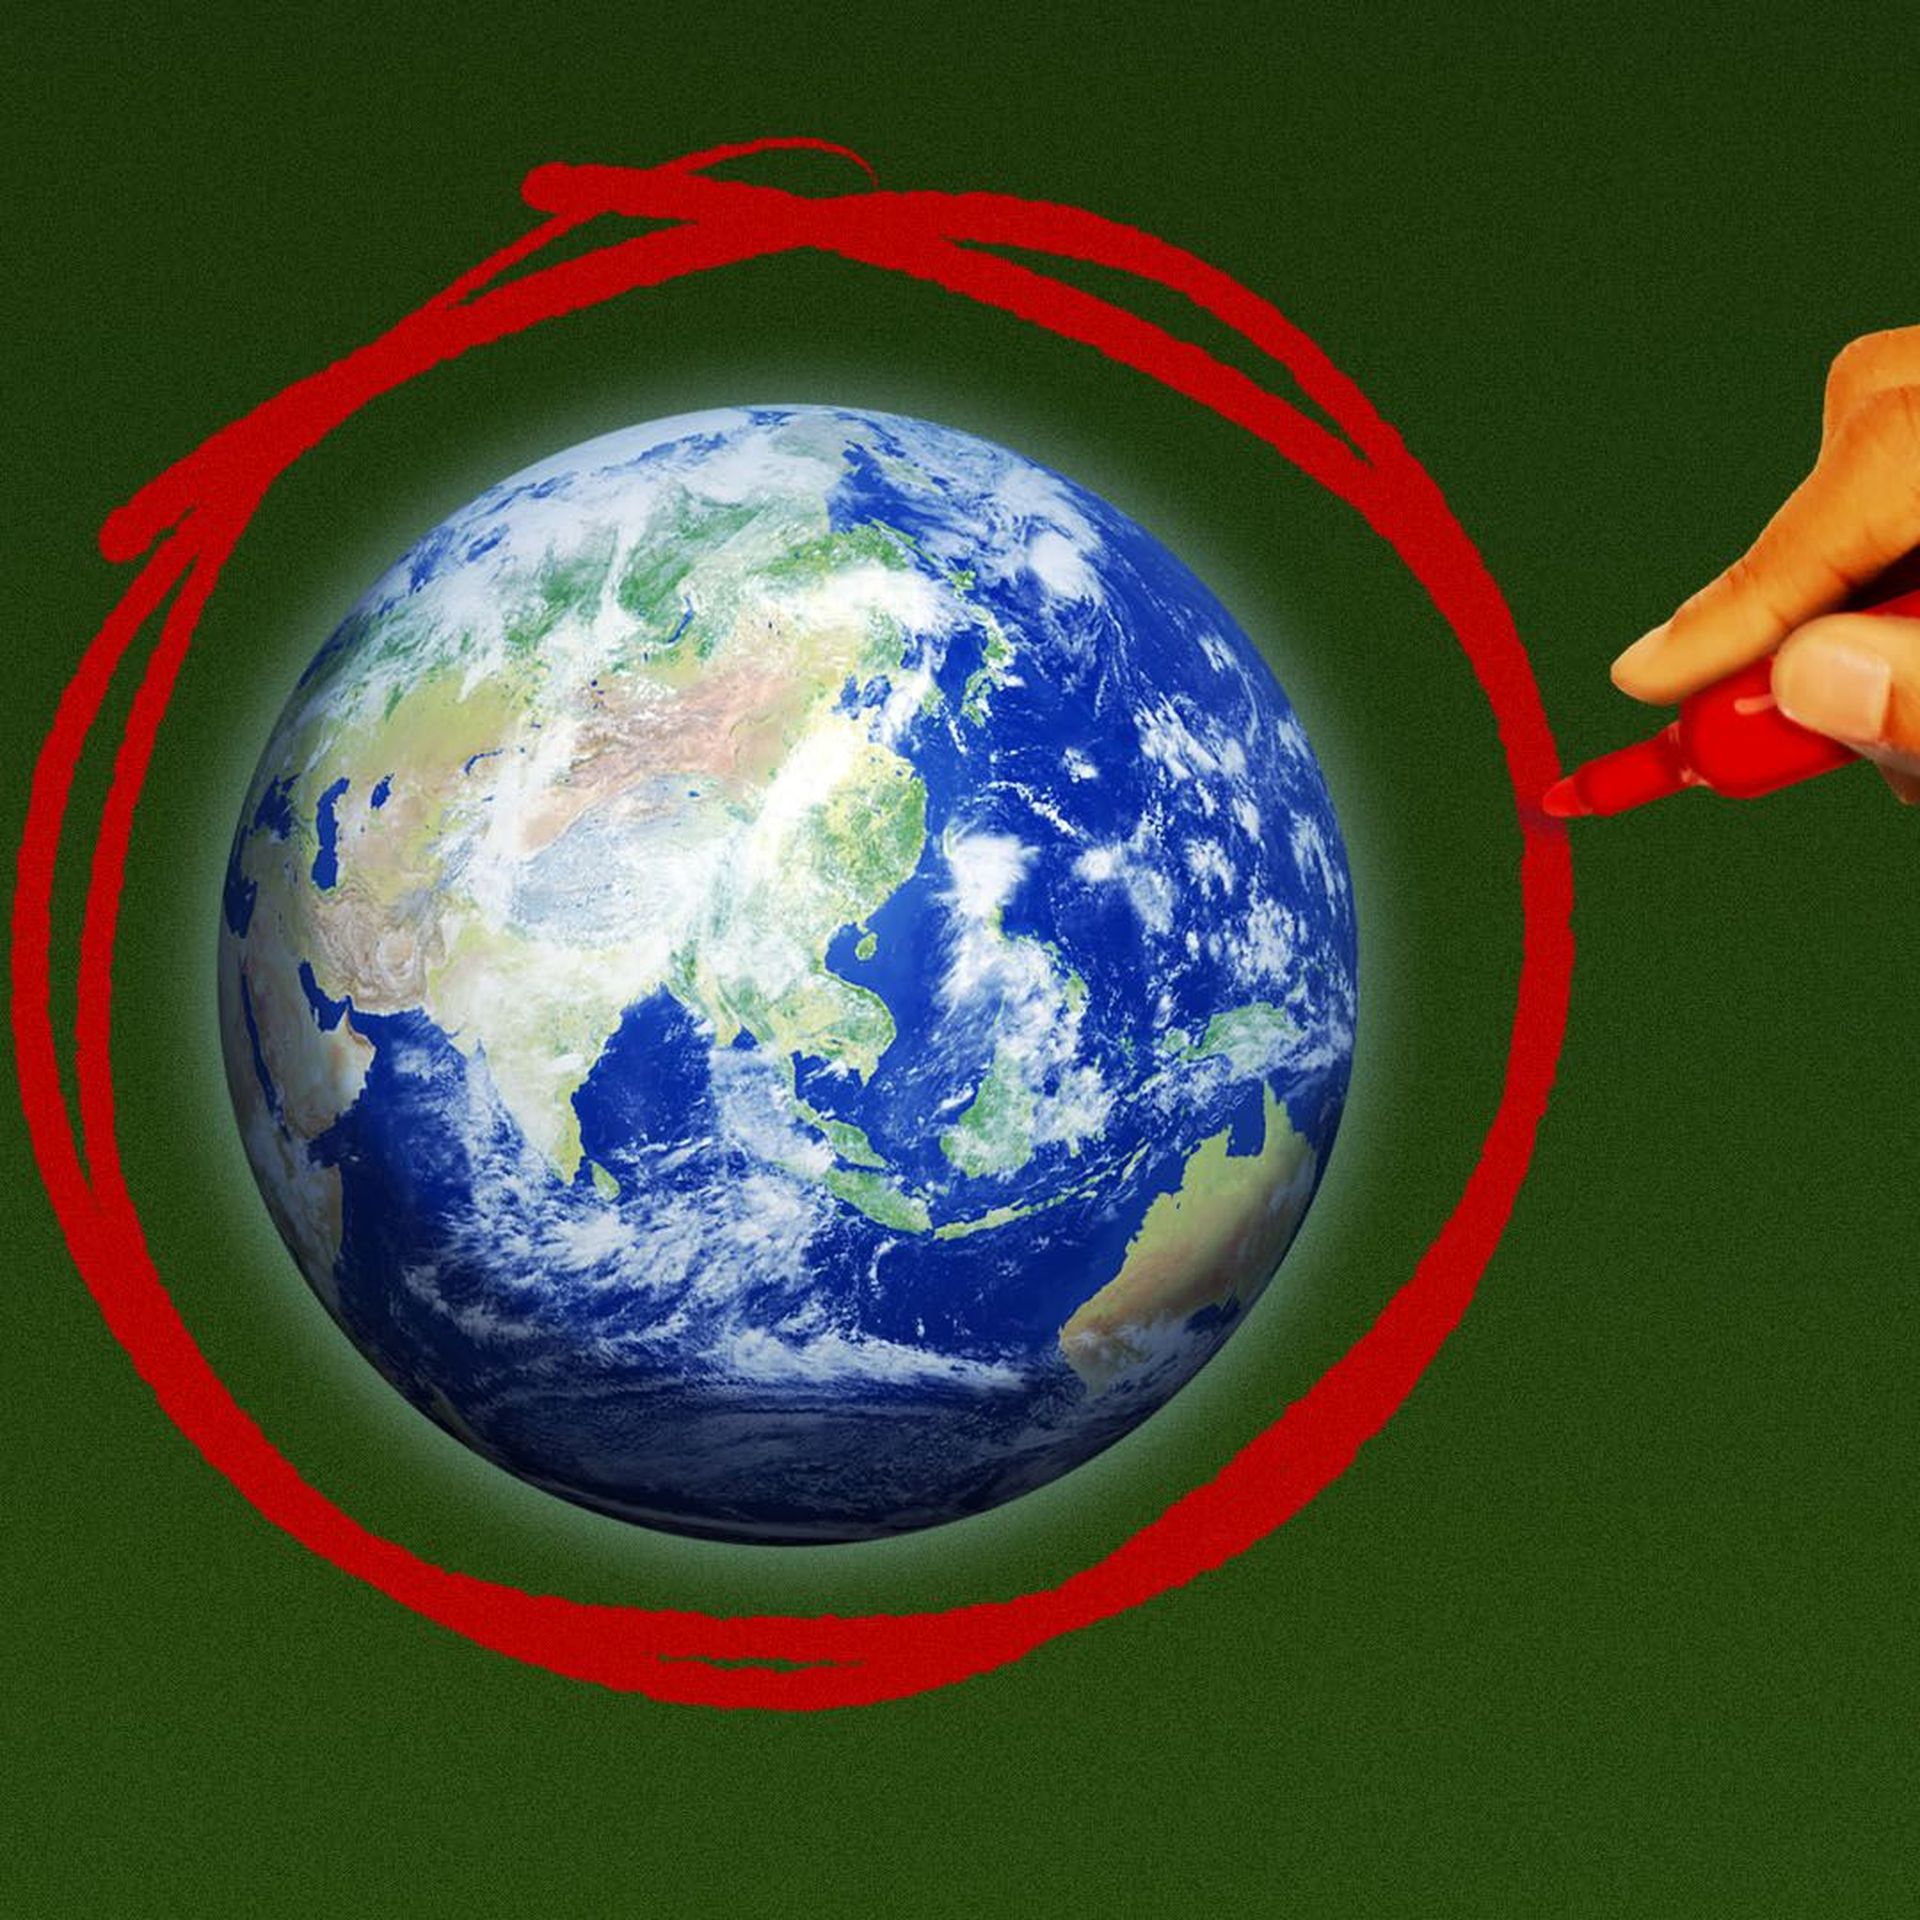 Illustration of a hand circling the earth with a marker